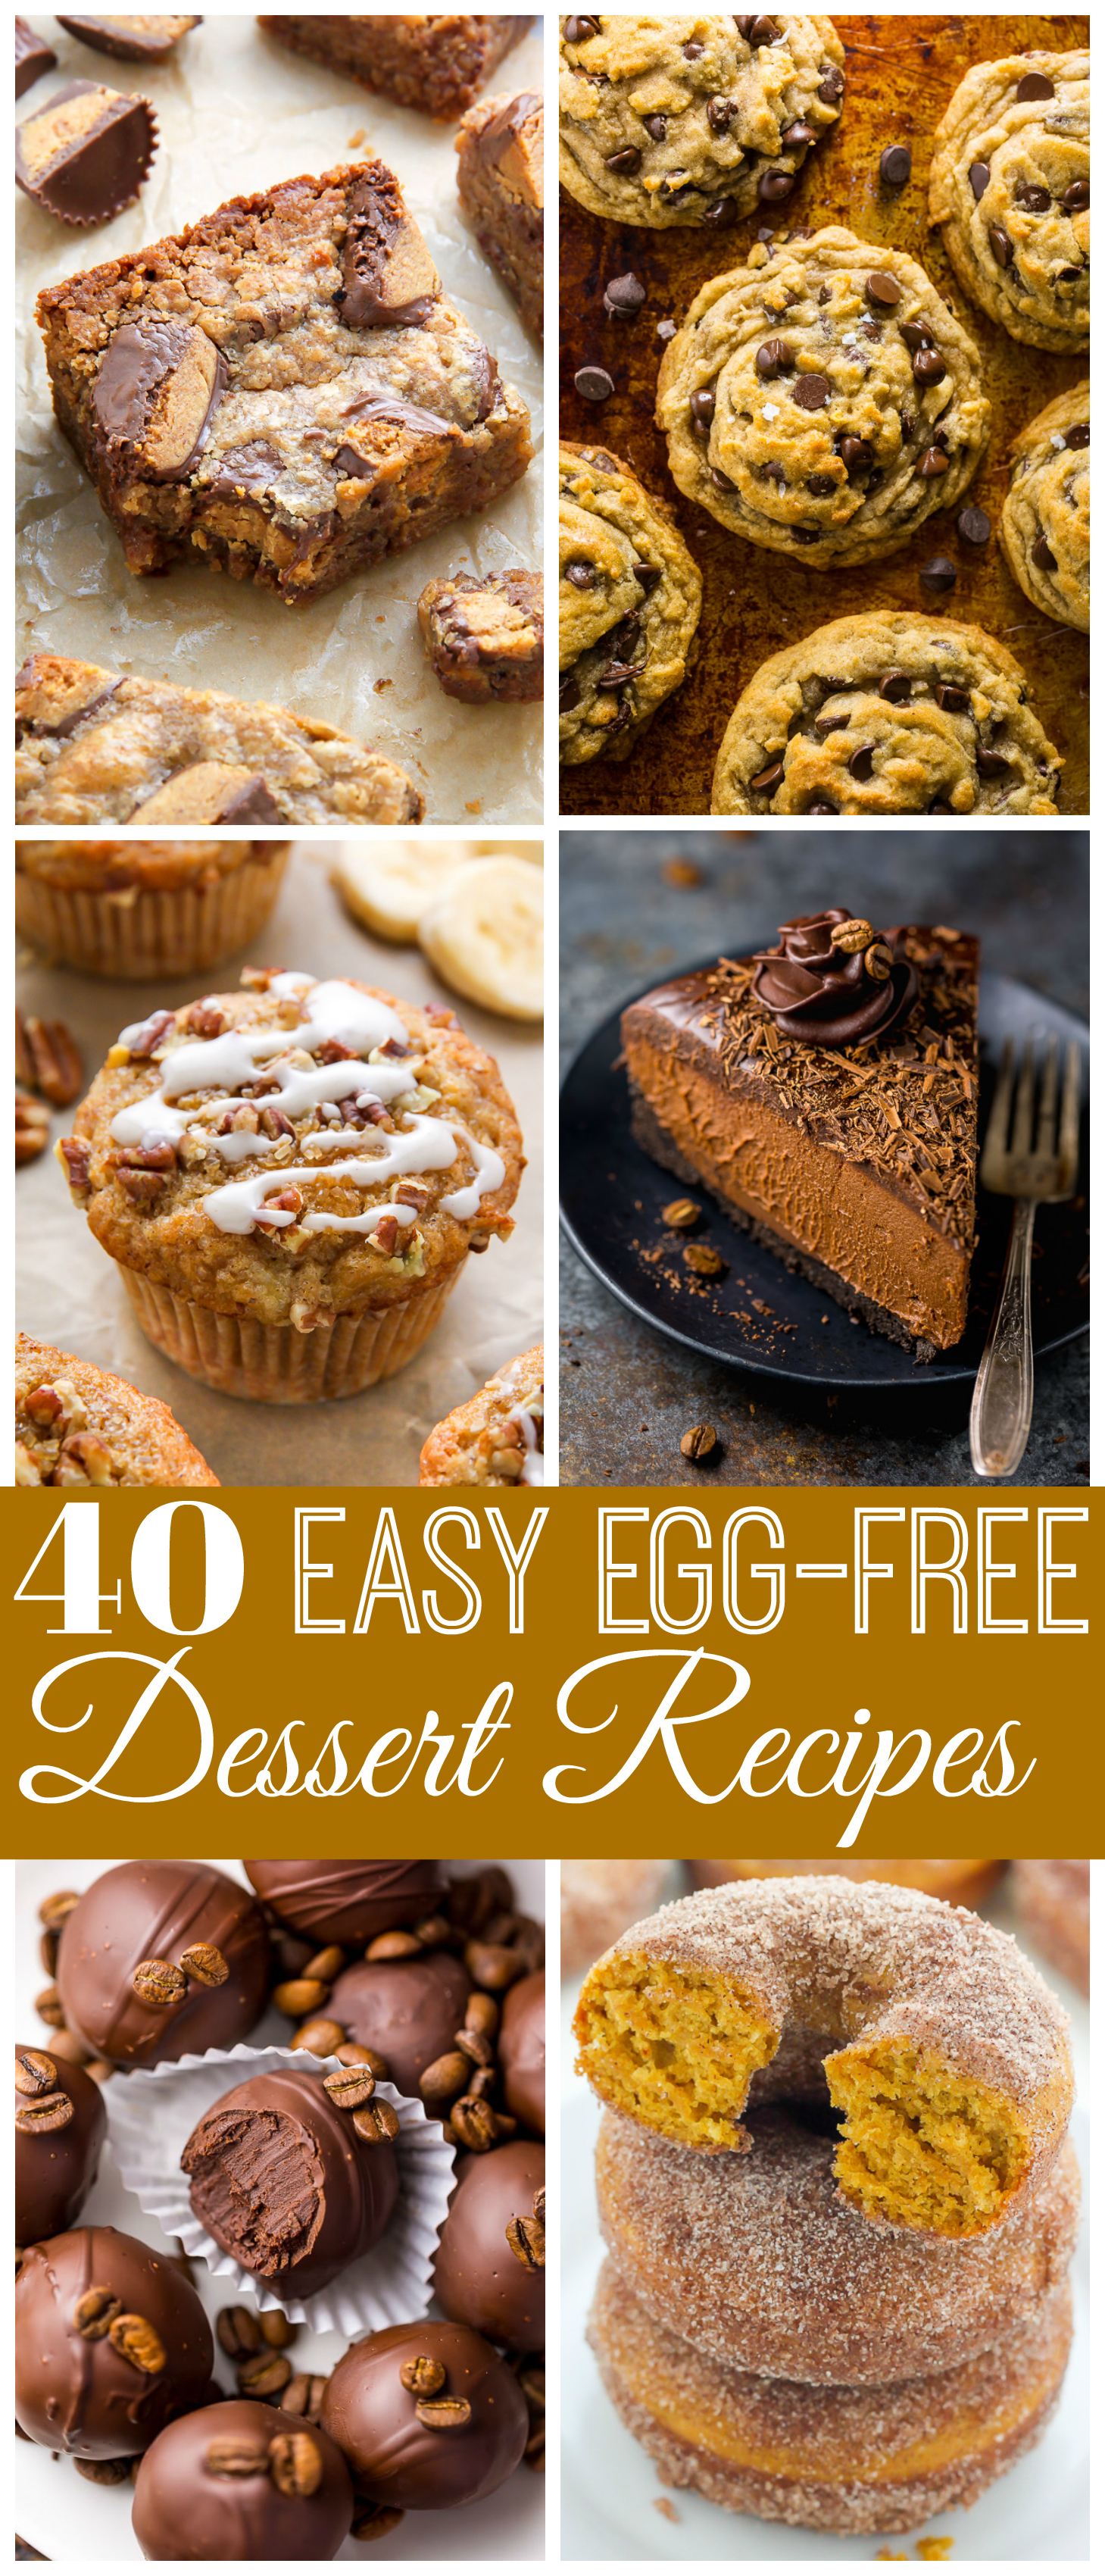 40+ Egg-Free Dessert Recipes! Featuring cakes, cookies, bars, pie, muffins, and donuts... there's something for everyone! #dessertrecipes #eggfree #eggfreedesserts 